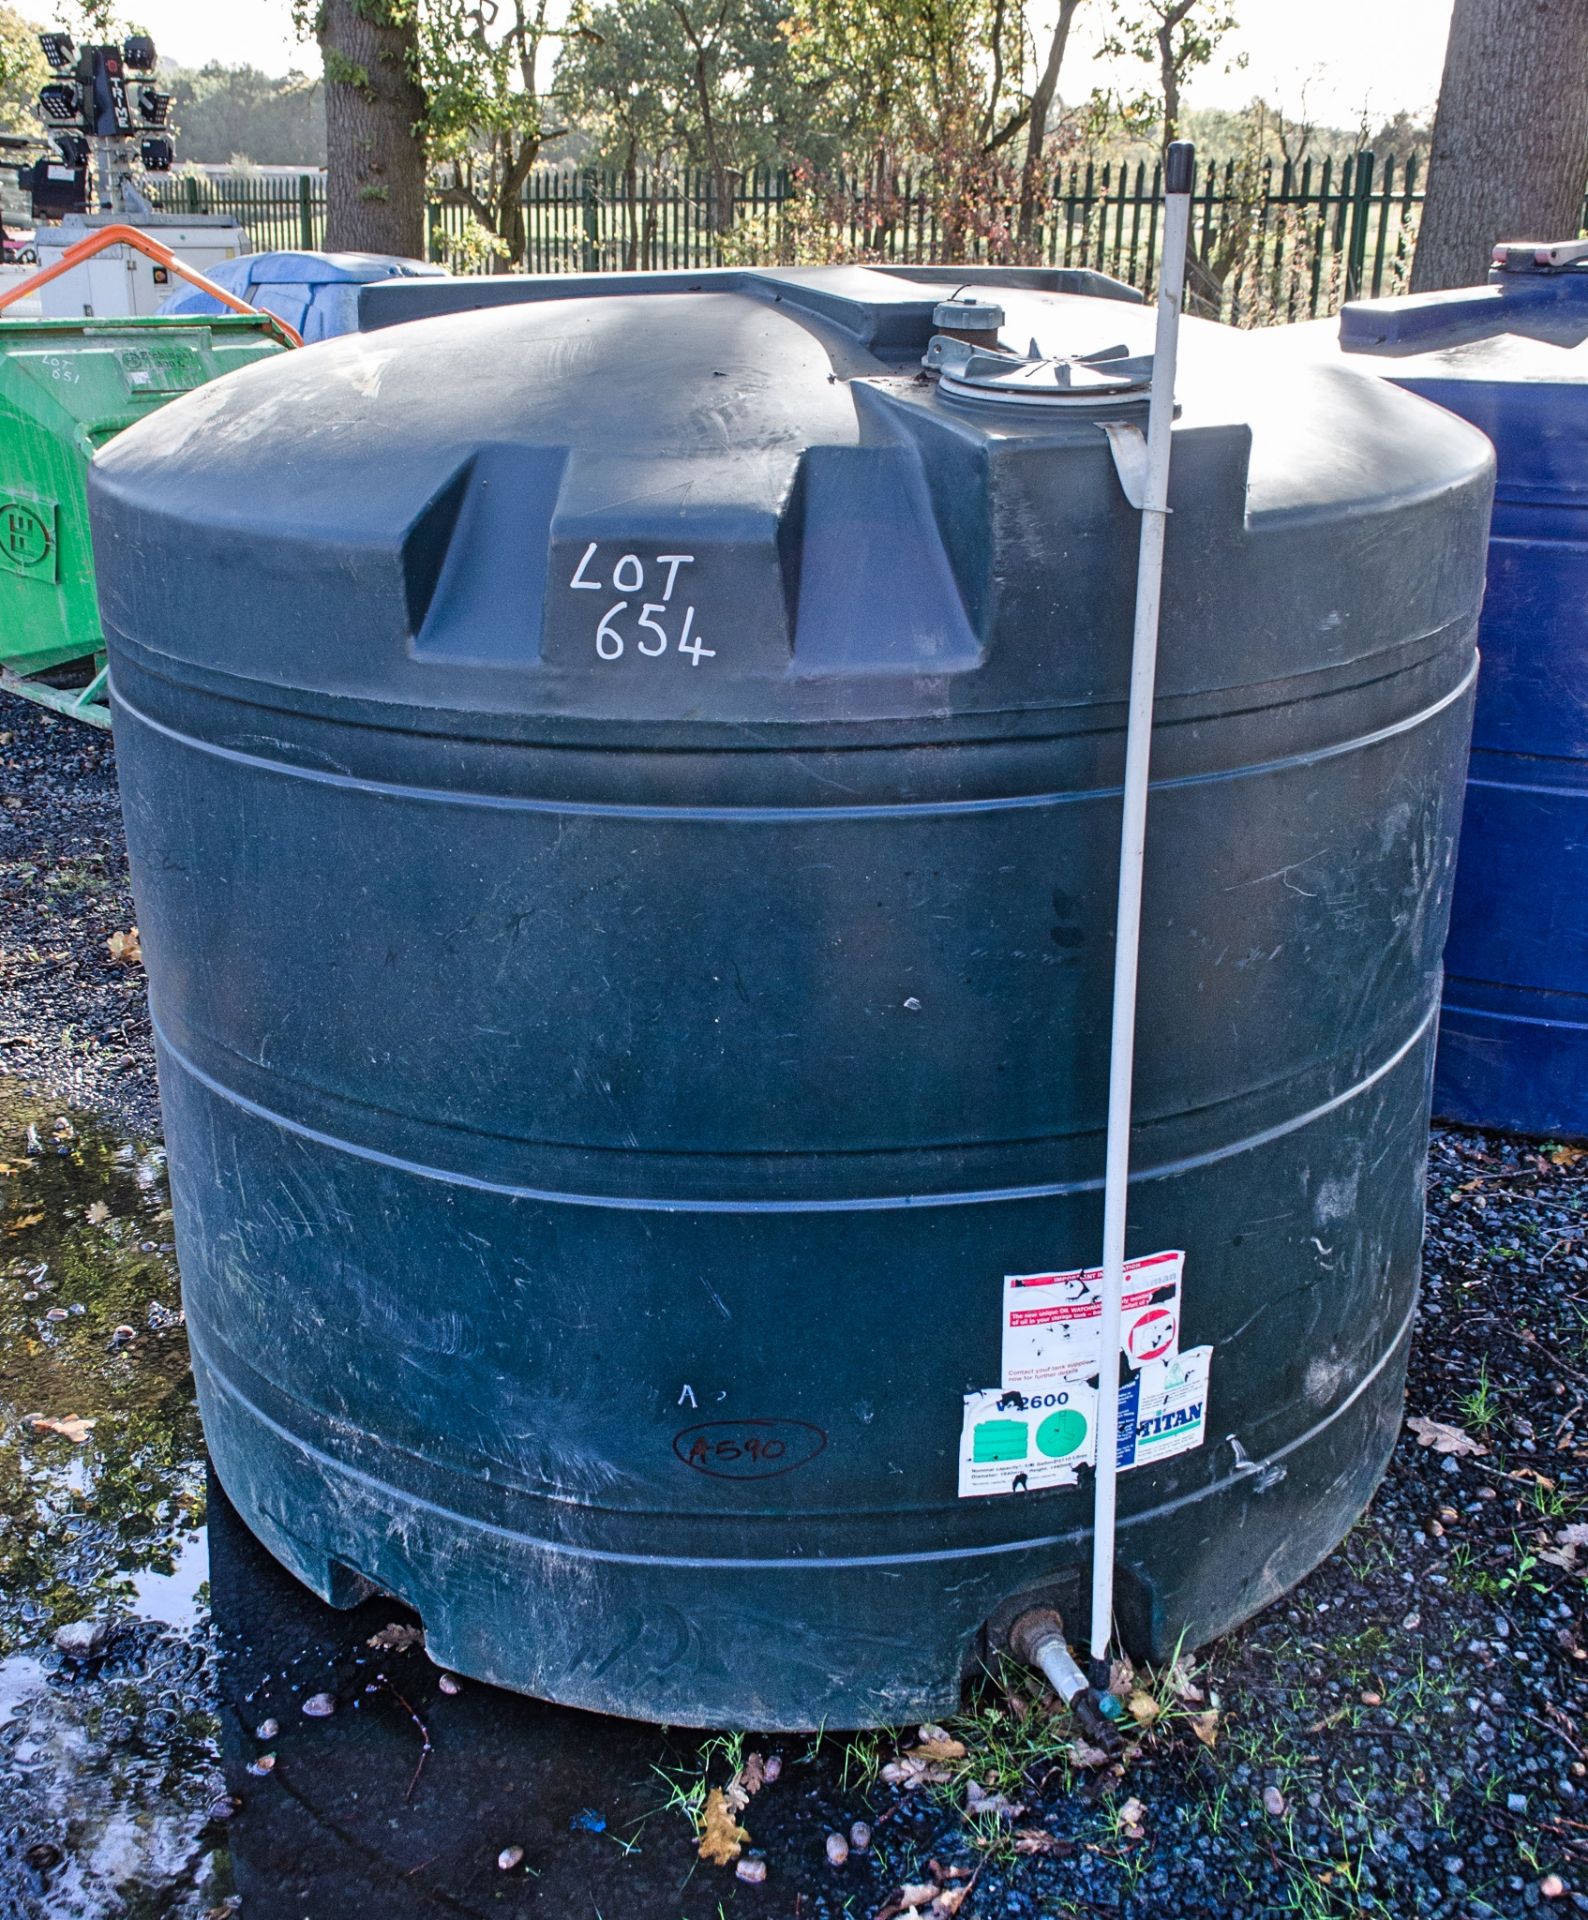 Titan 2700 litre oil tank ** No VAT on hammer price but VAT will be charged on the buyer's